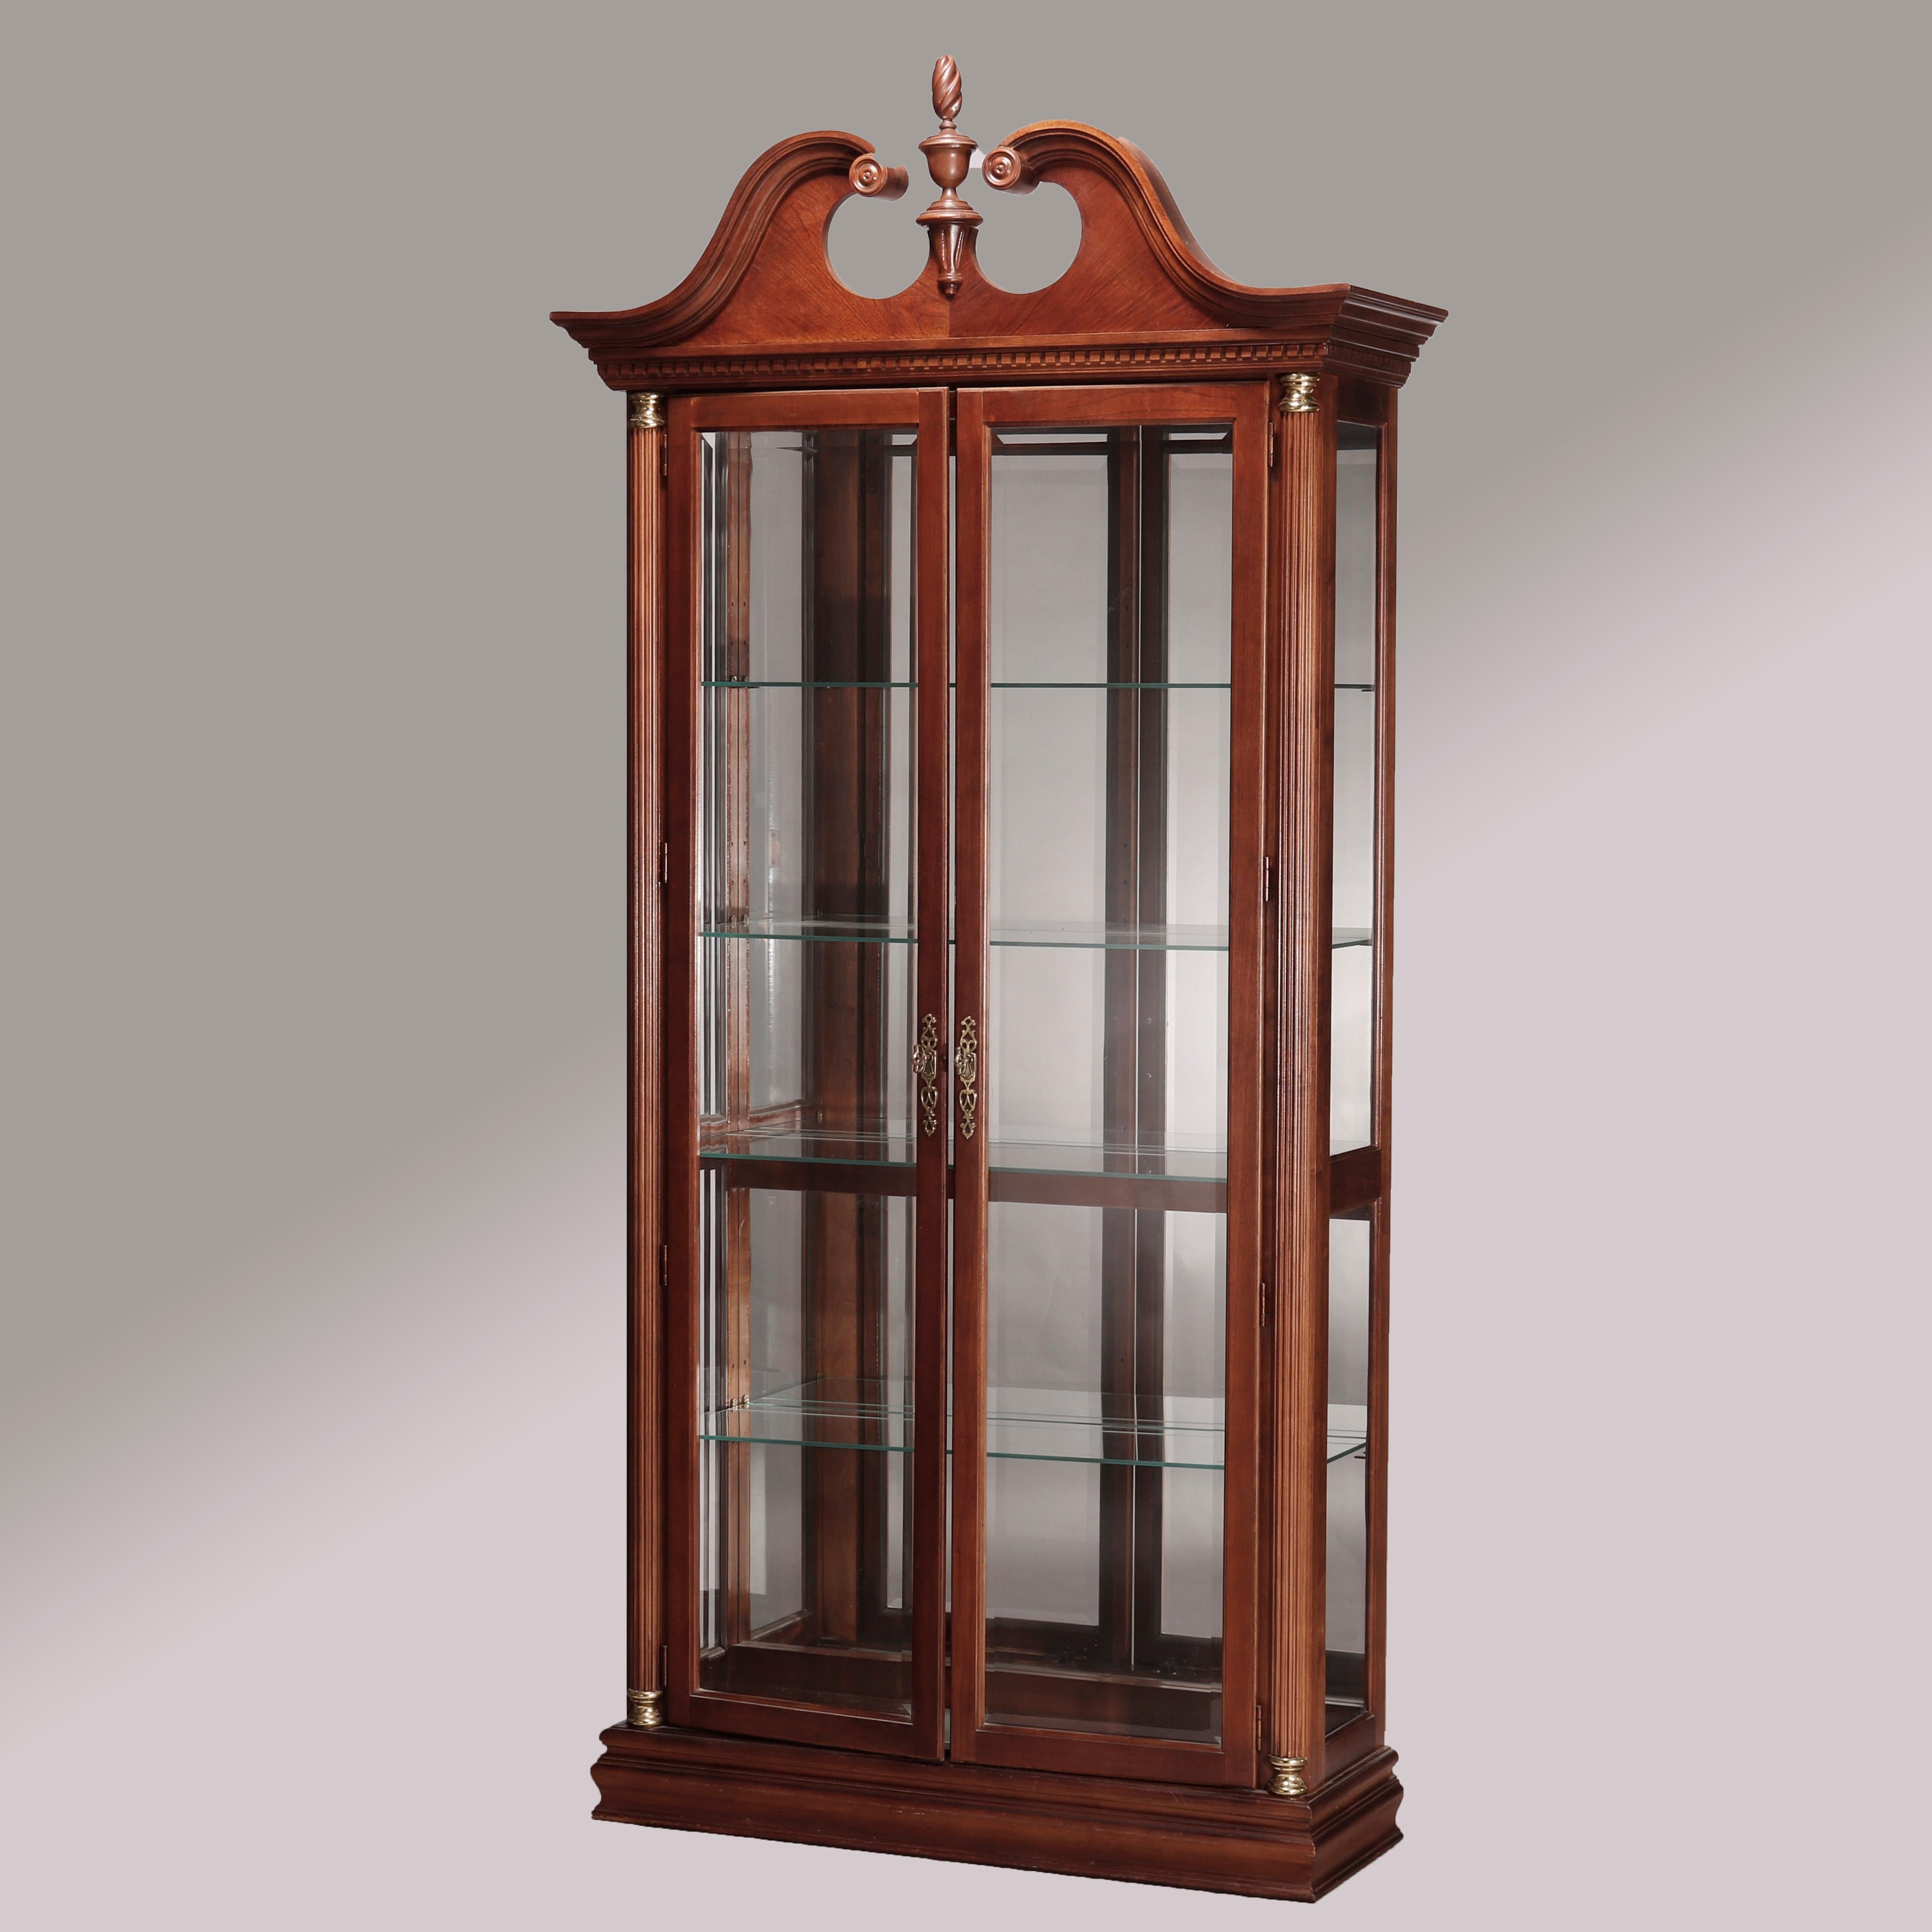 American Federal Style Carved Mahogany Mirrored Display Cabinet by Pulaski, 20th C